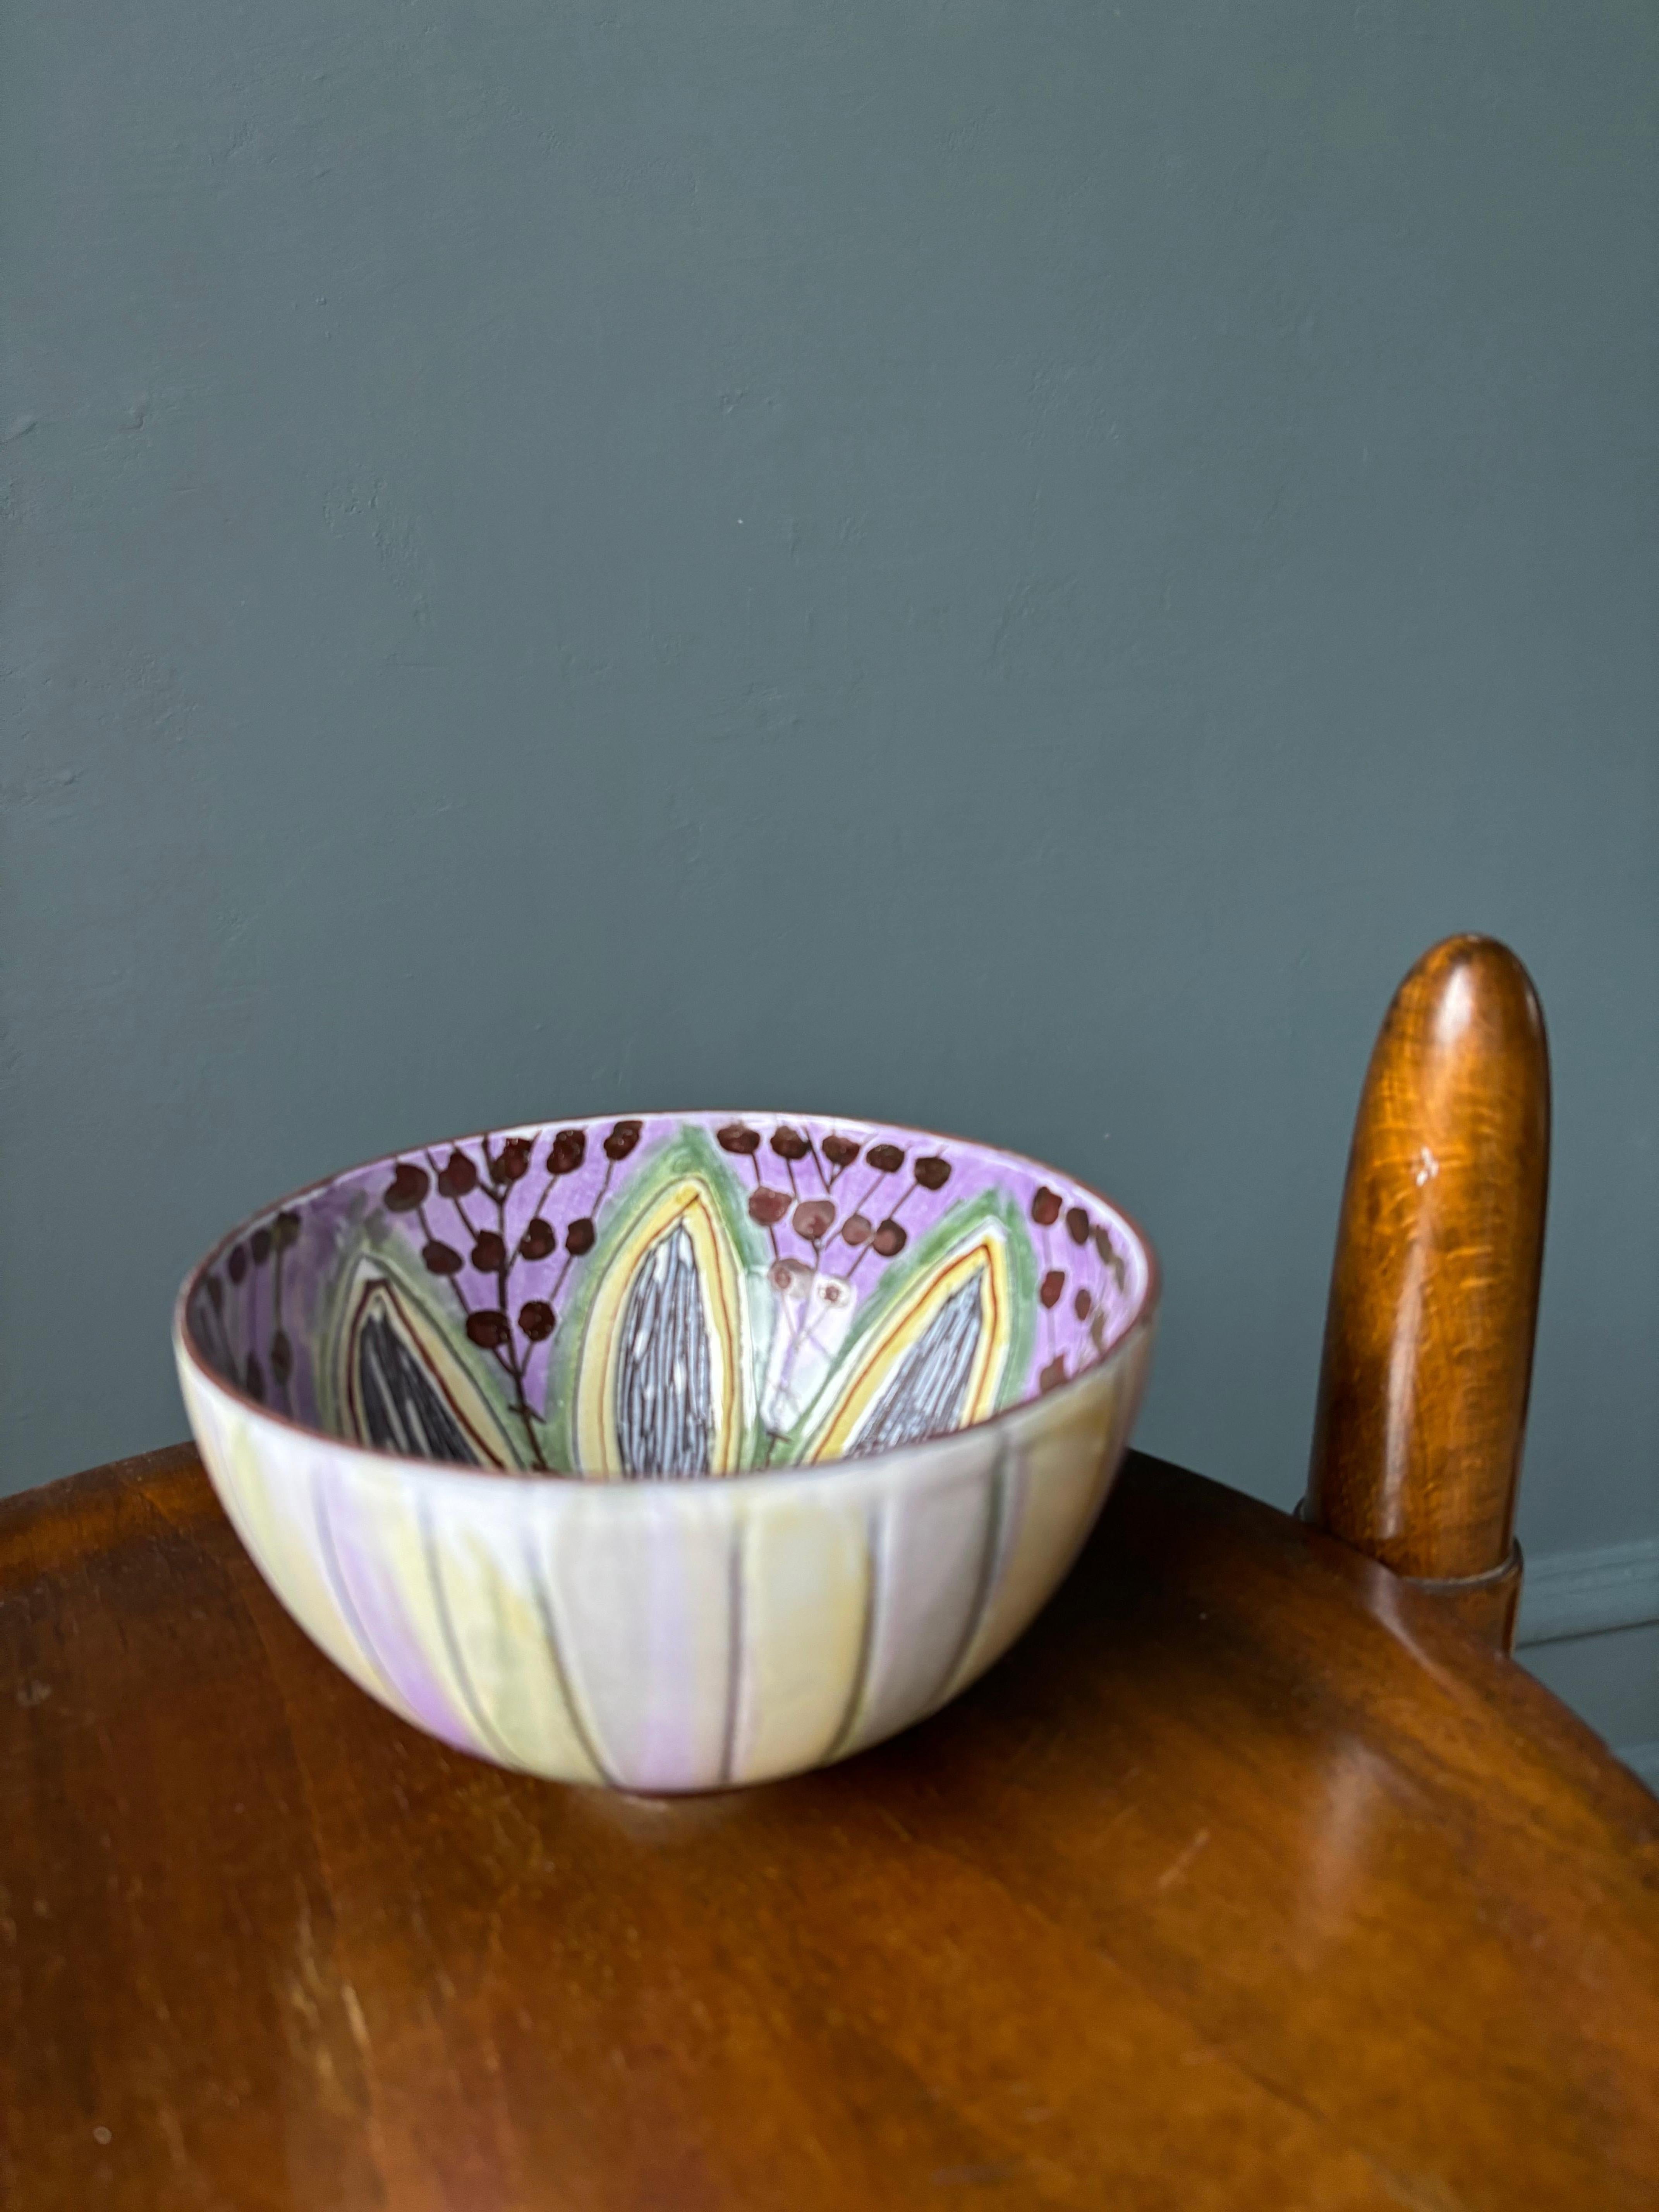 Hand-painted multicolored Scandinavian Modern decorative ceramic vide-poche bowl manufactured by Laholm in the 1960s. Soft pastel stripes on the exterior and stylized flower petals, dots and lines on the inside in lilac, green, burgundy and yellow